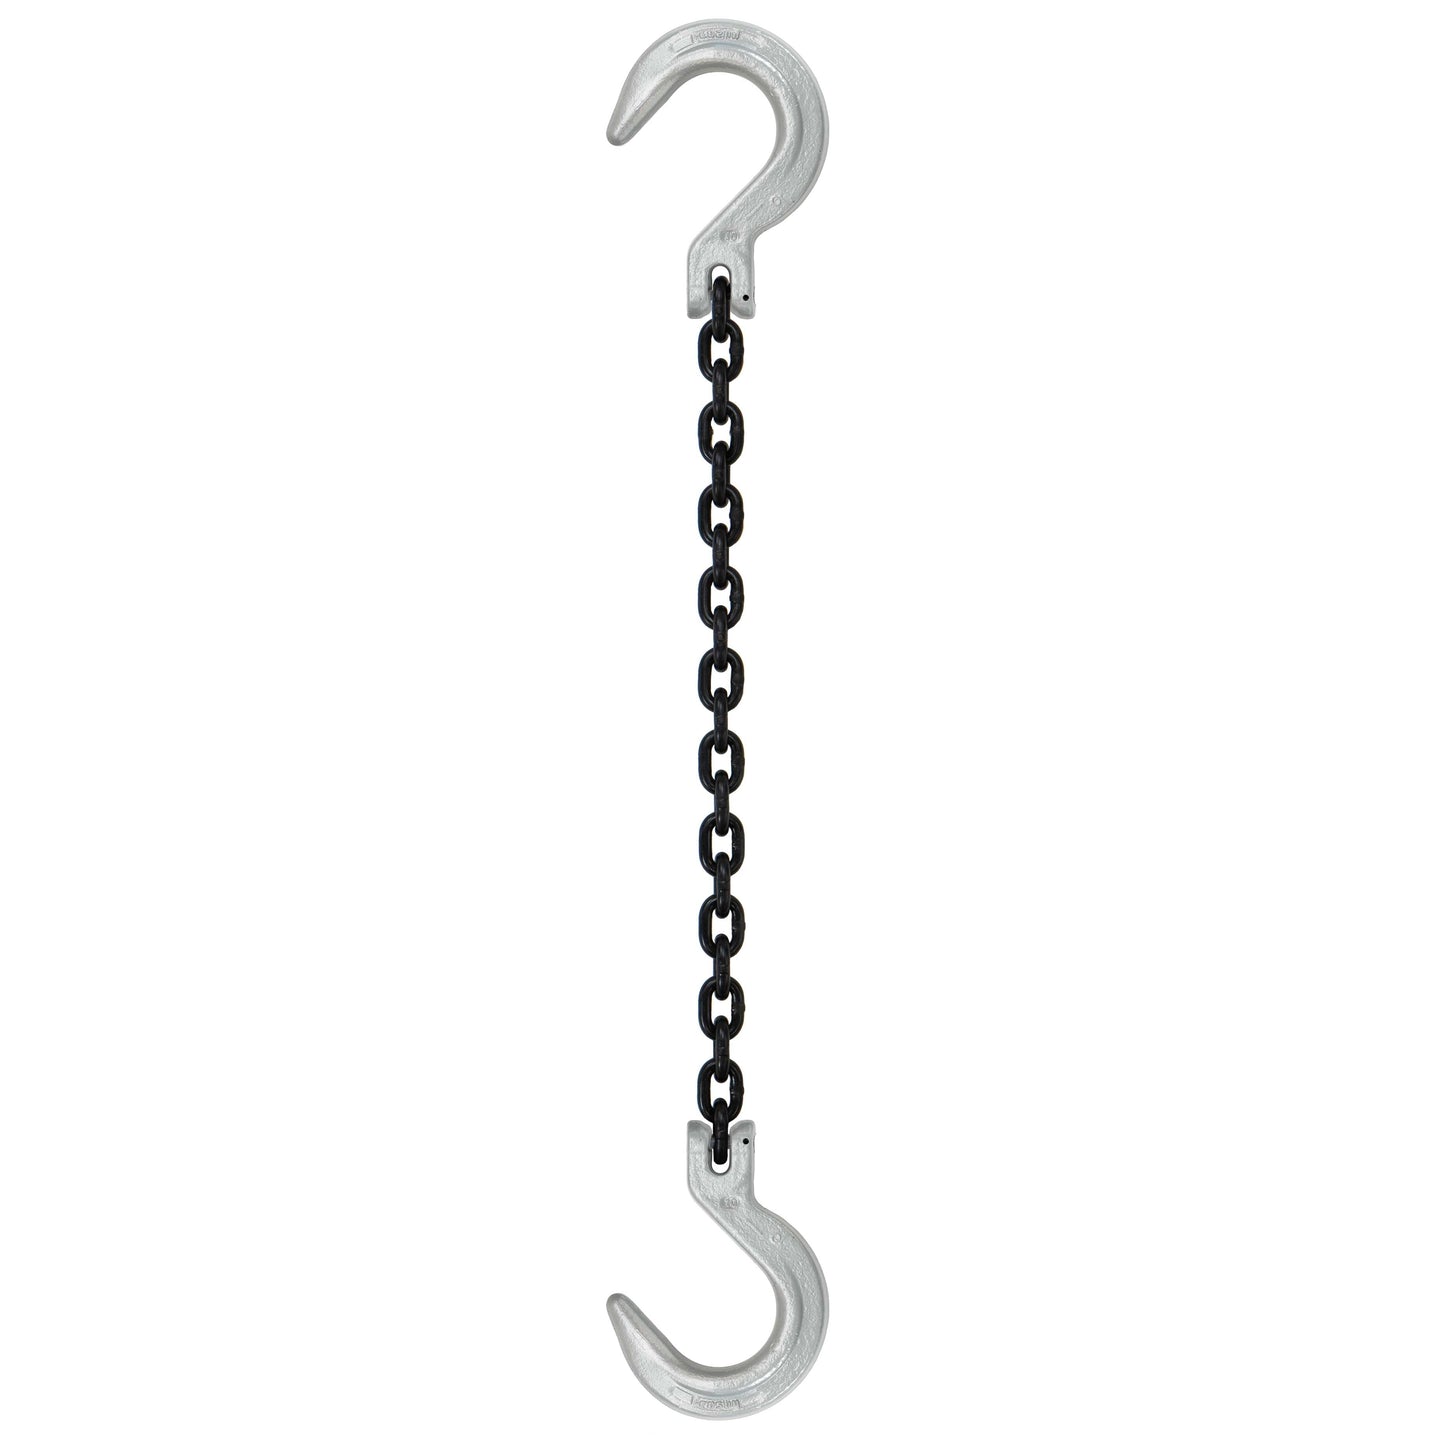 932 inch x 5 foot Domestic Single Leg Chain Sling w Crosby Foundry & Foundry Hooks Grade 100 image 1 of 2